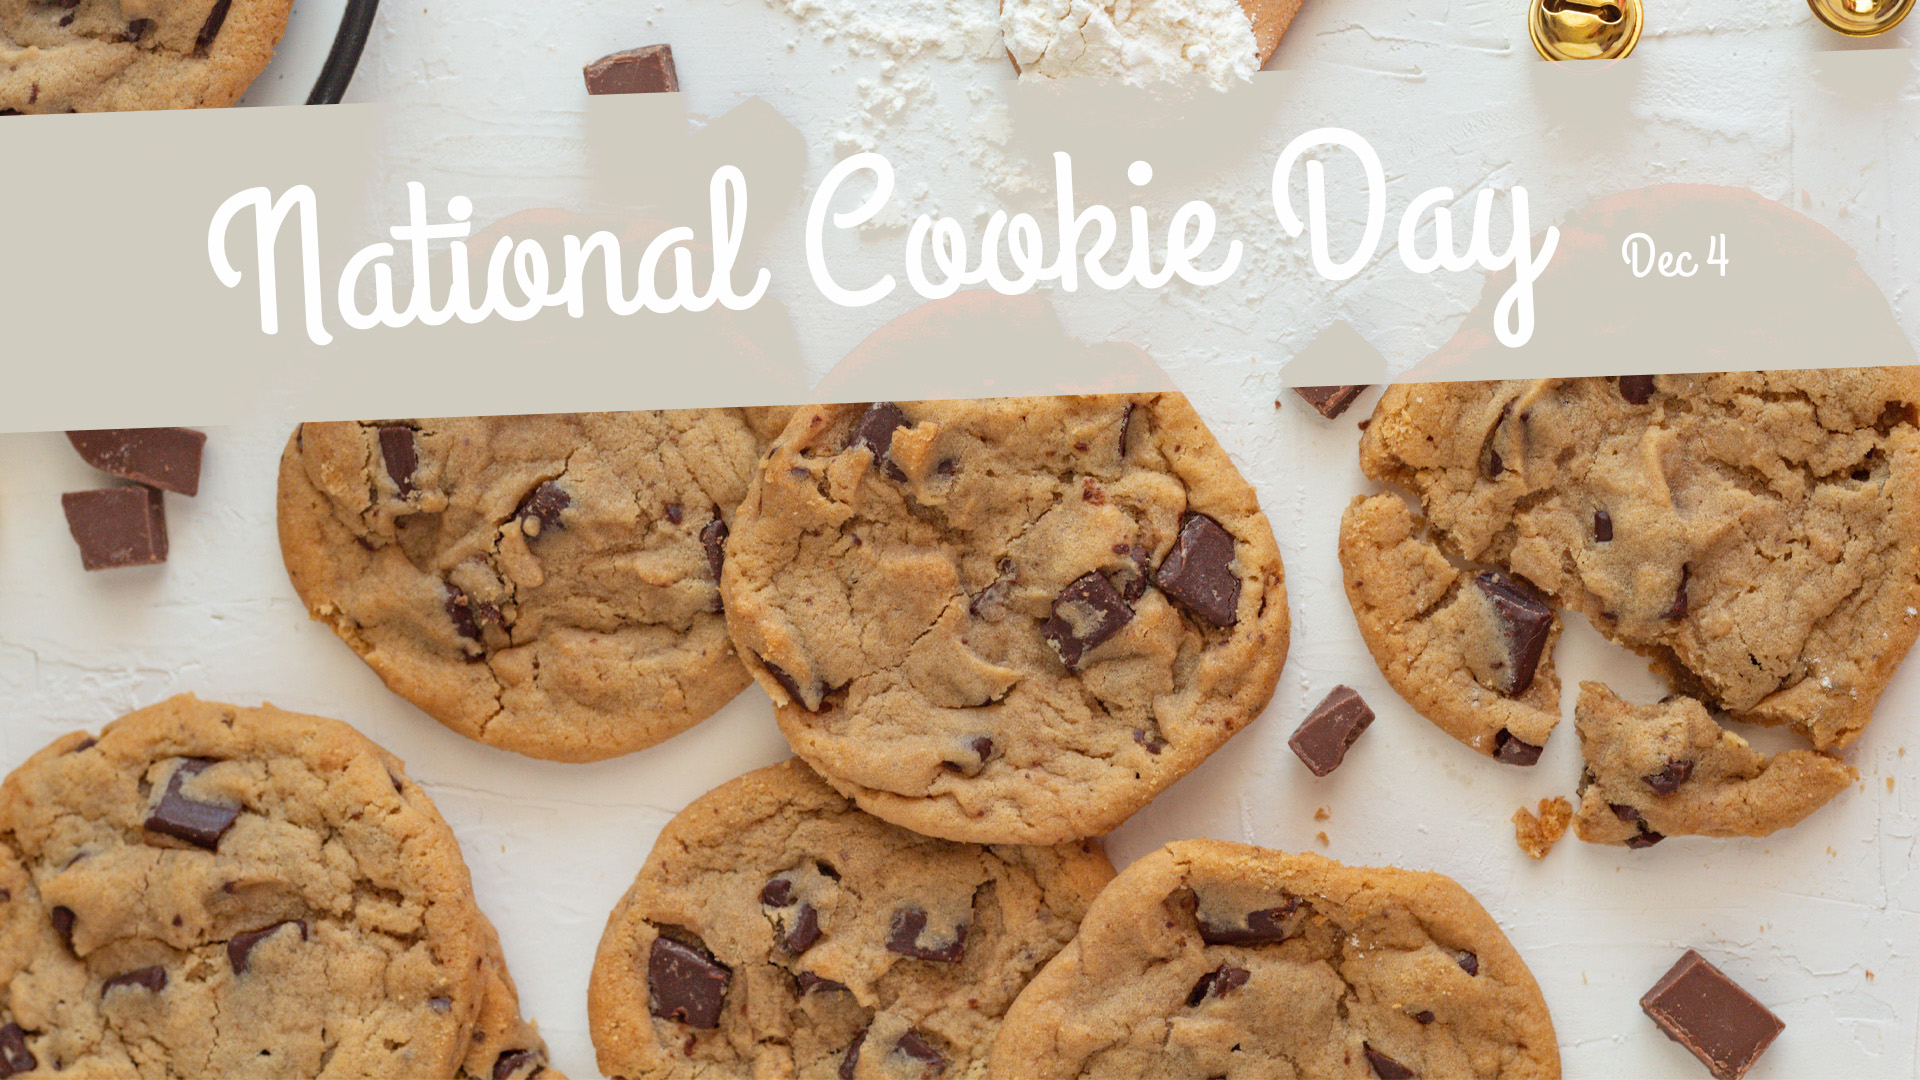 National Cookie Day spread across the top of the screen on a tan banner. The background is a photo of freshly baked chocolate chip cookies laying out.